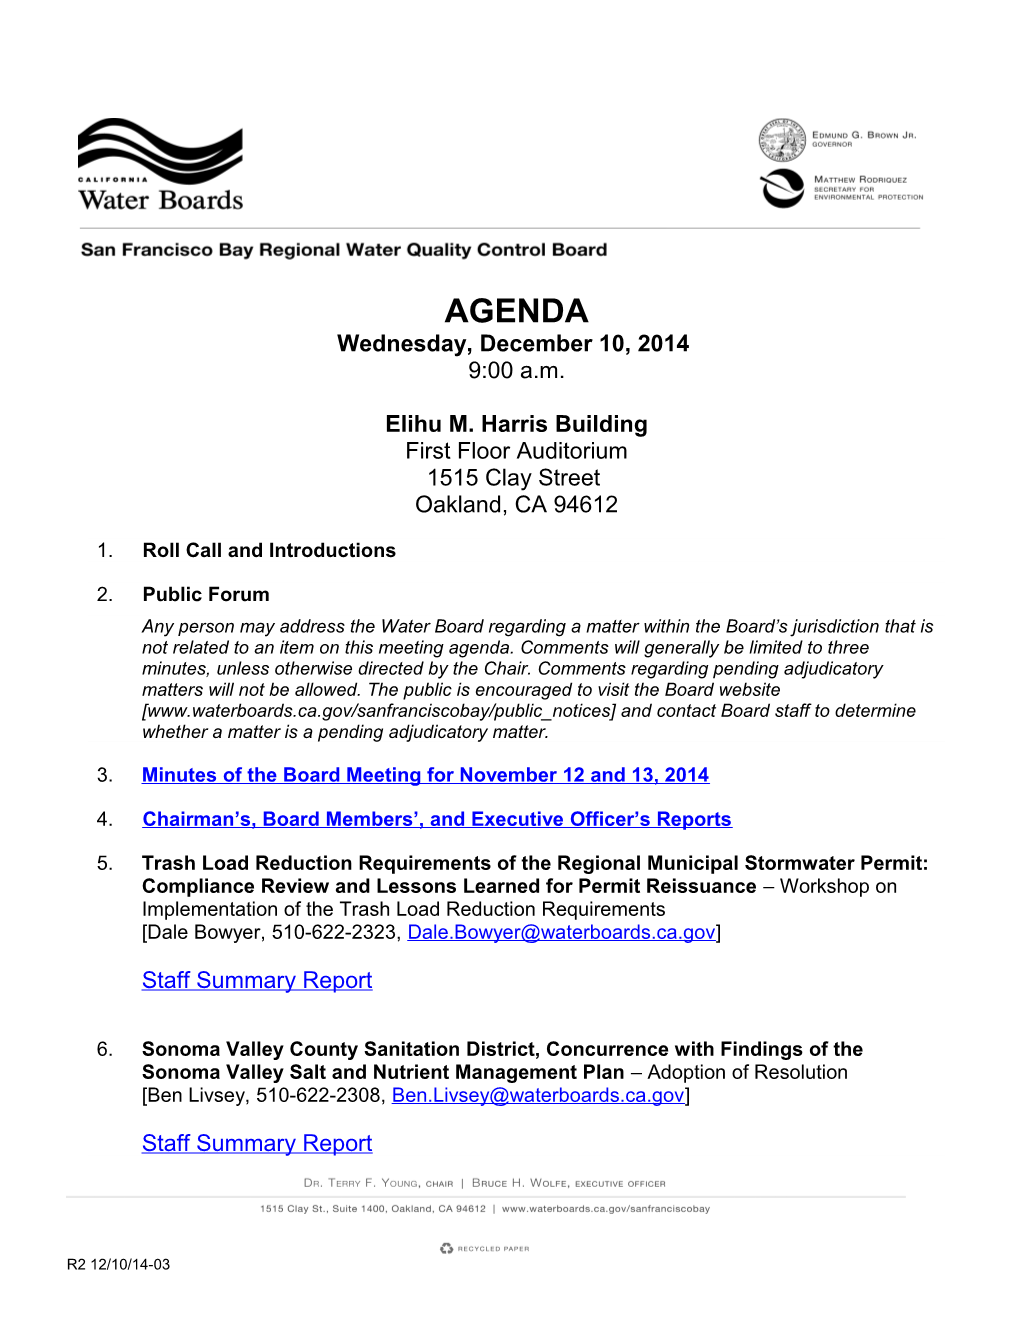 Water Board Meeting Agenda Page 2 s2